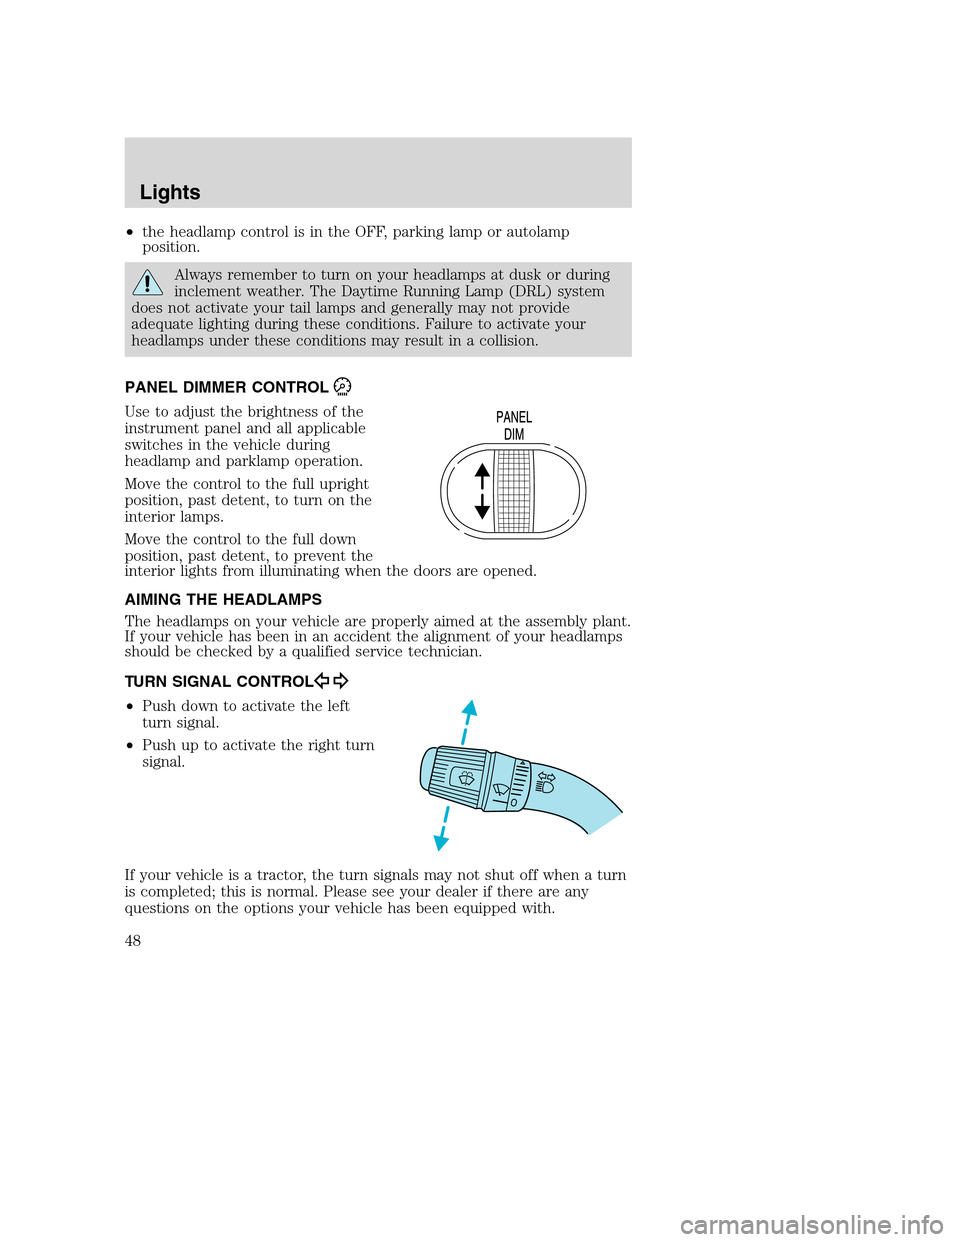 FORD F650 2005 11.G Service Manual •the headlamp control is in the OFF, parking lamp or autolamp
position.
Always remember to turn on your headlamps at dusk or during
inclement weather. The Daytime Running Lamp (DRL) system
does not 